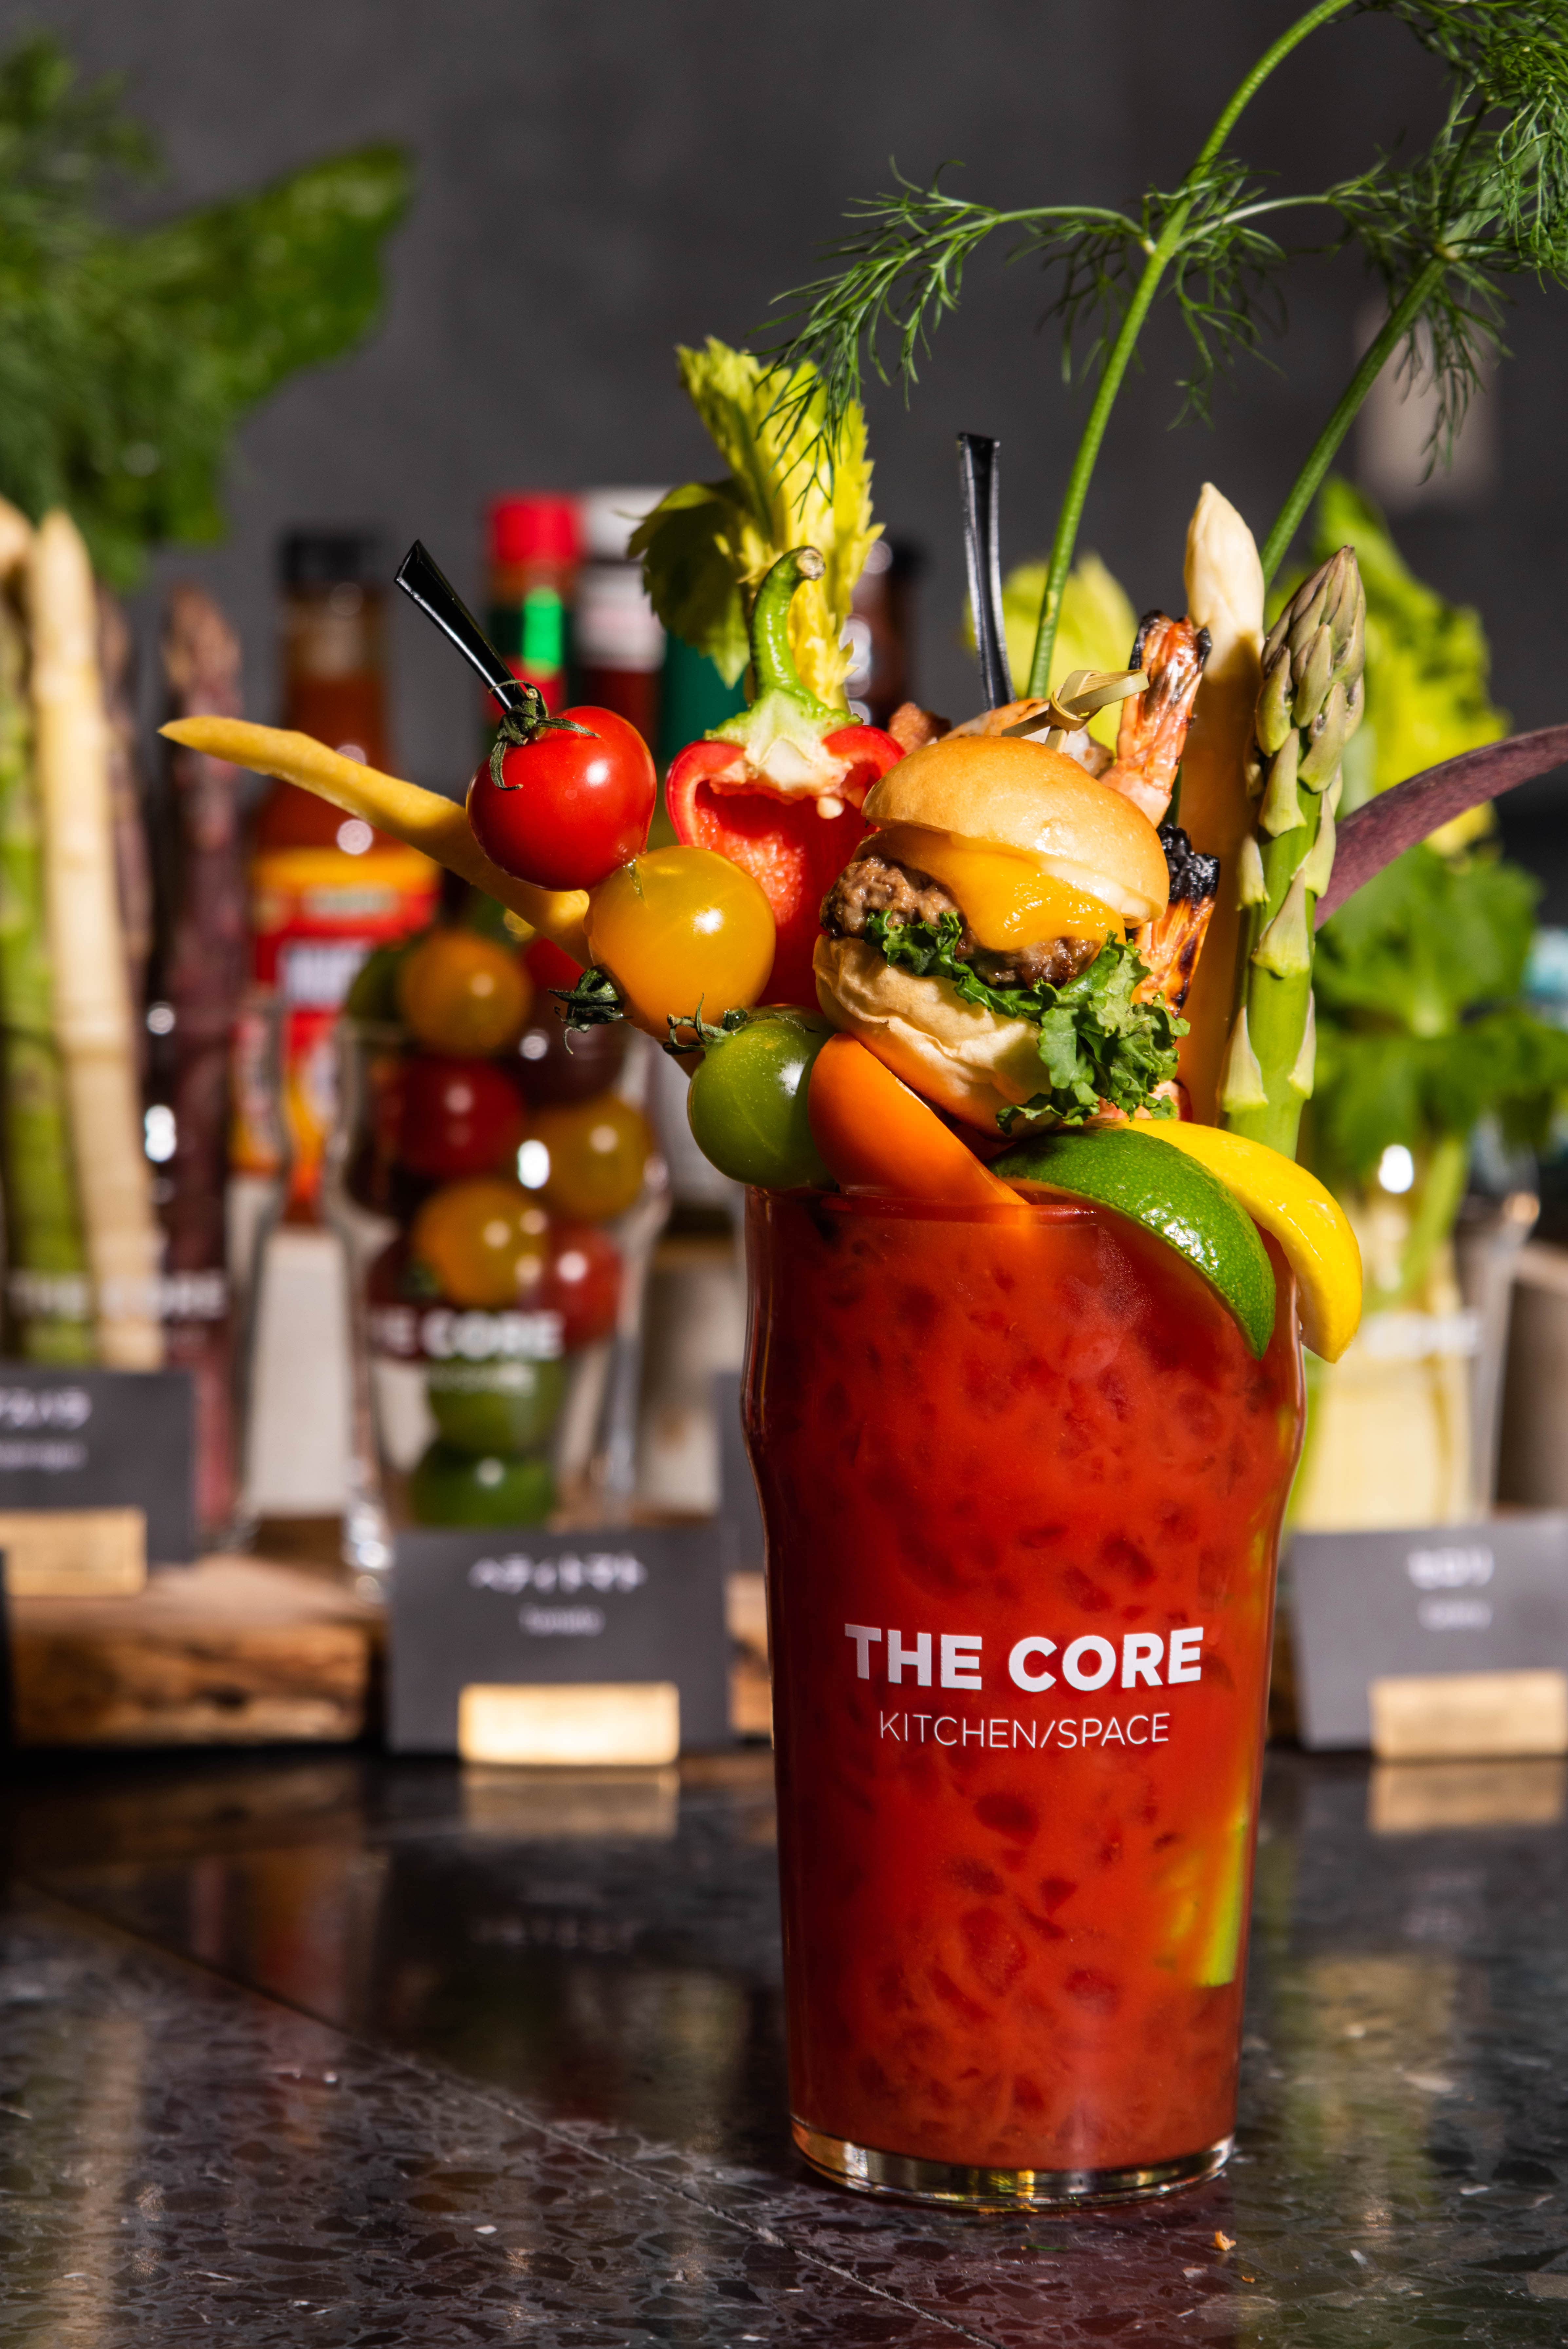 The core kitchen space Crazy Bloody Maryザ　コア　キッチン　スペース　クレイジー　ブラッディ　マリーCrazy Bloody Mary③-min